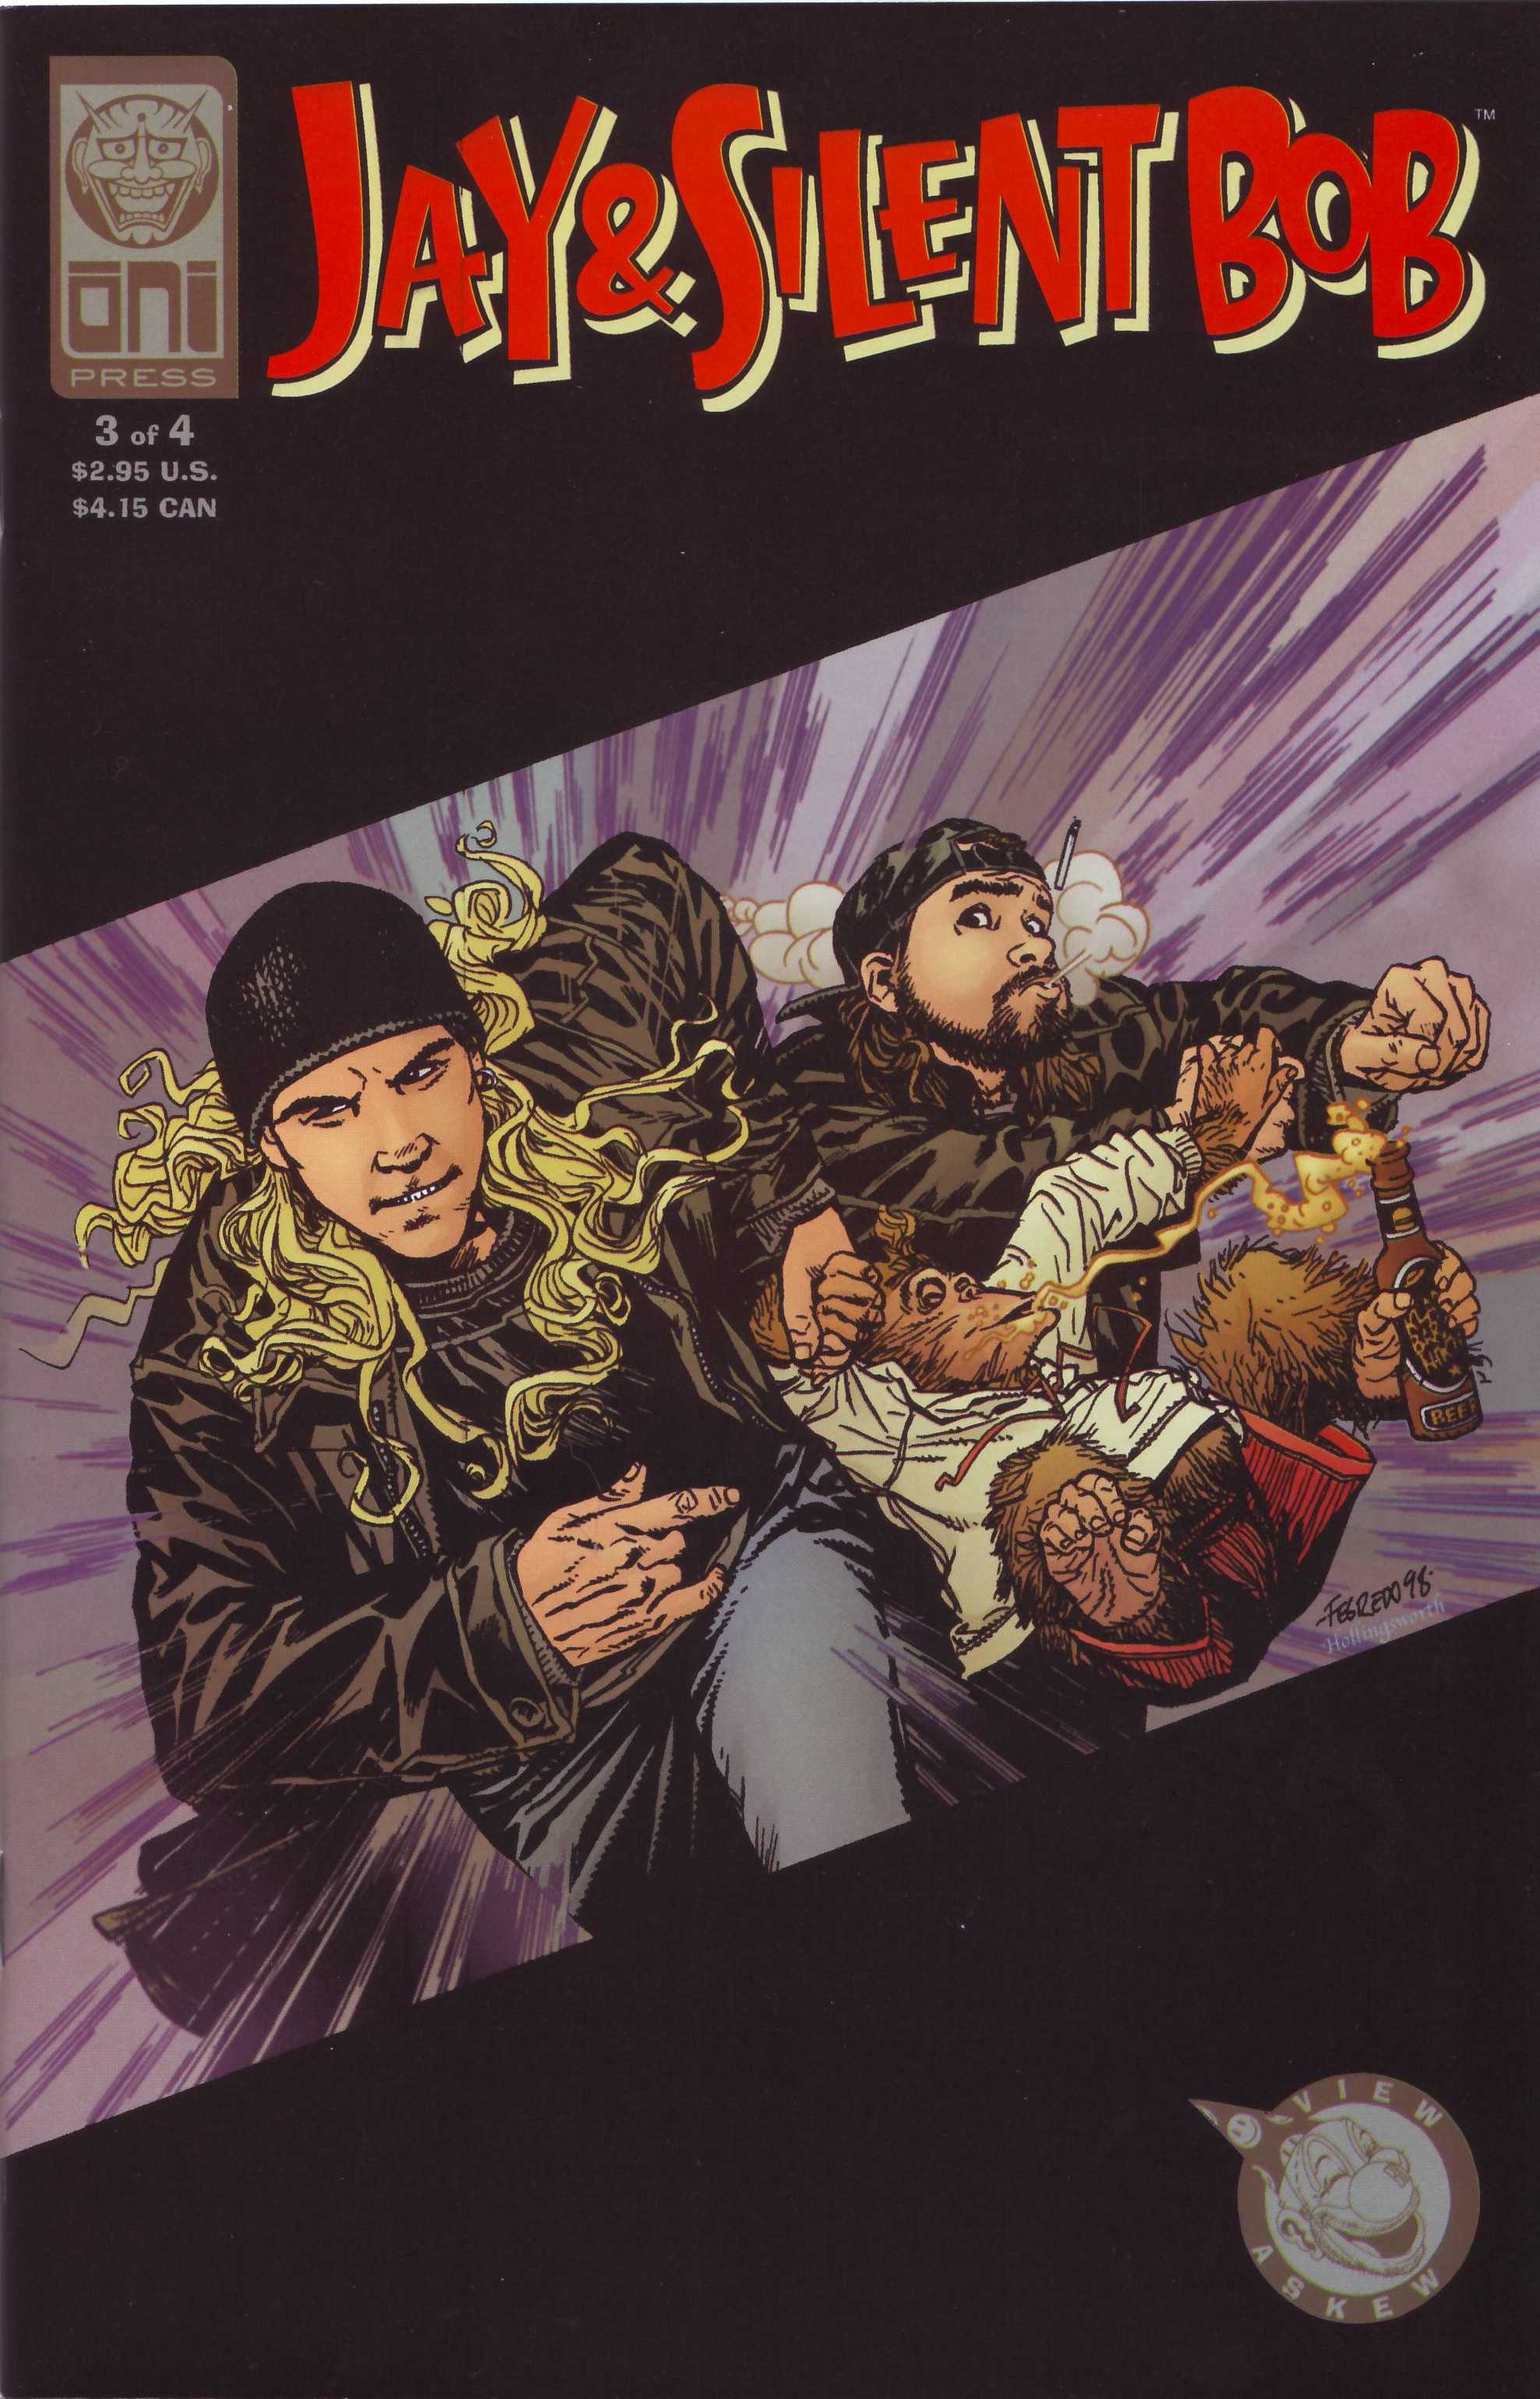 Read online Jay & Silent Bob comic -  Issue #3 - 1